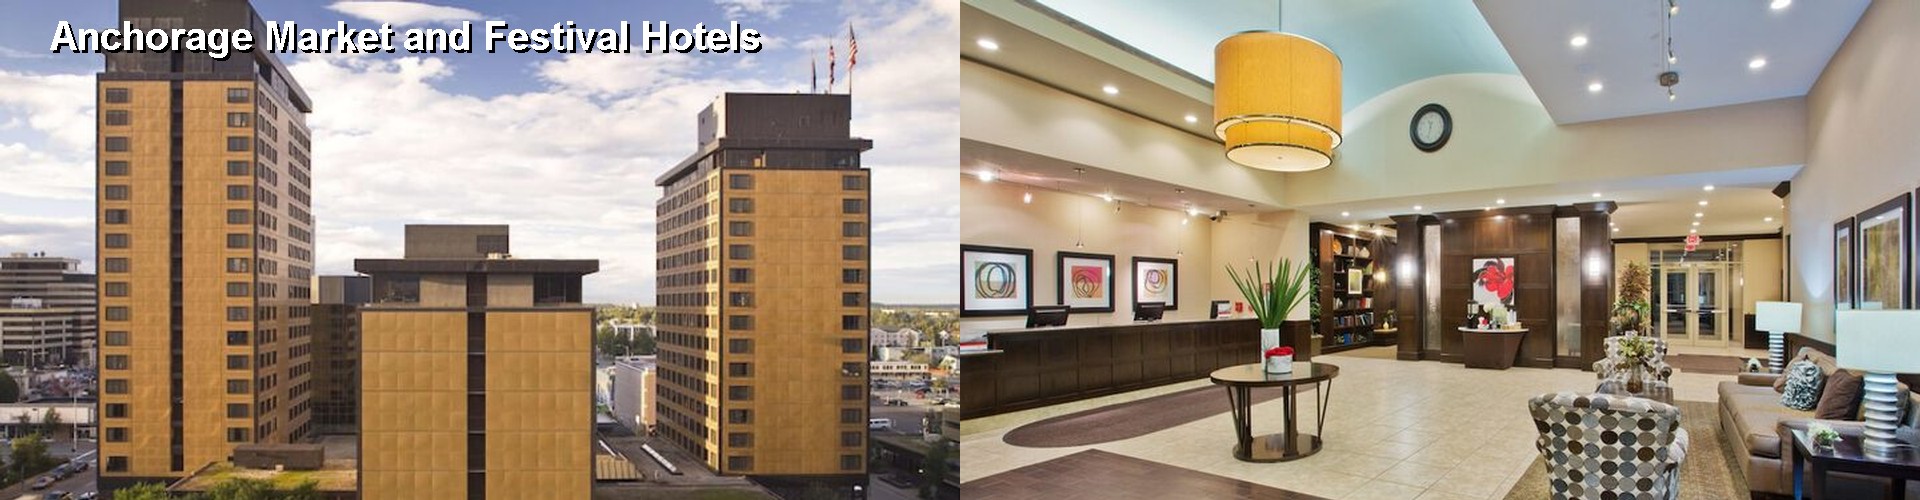 5 Best Hotels near Anchorage Market and Festival